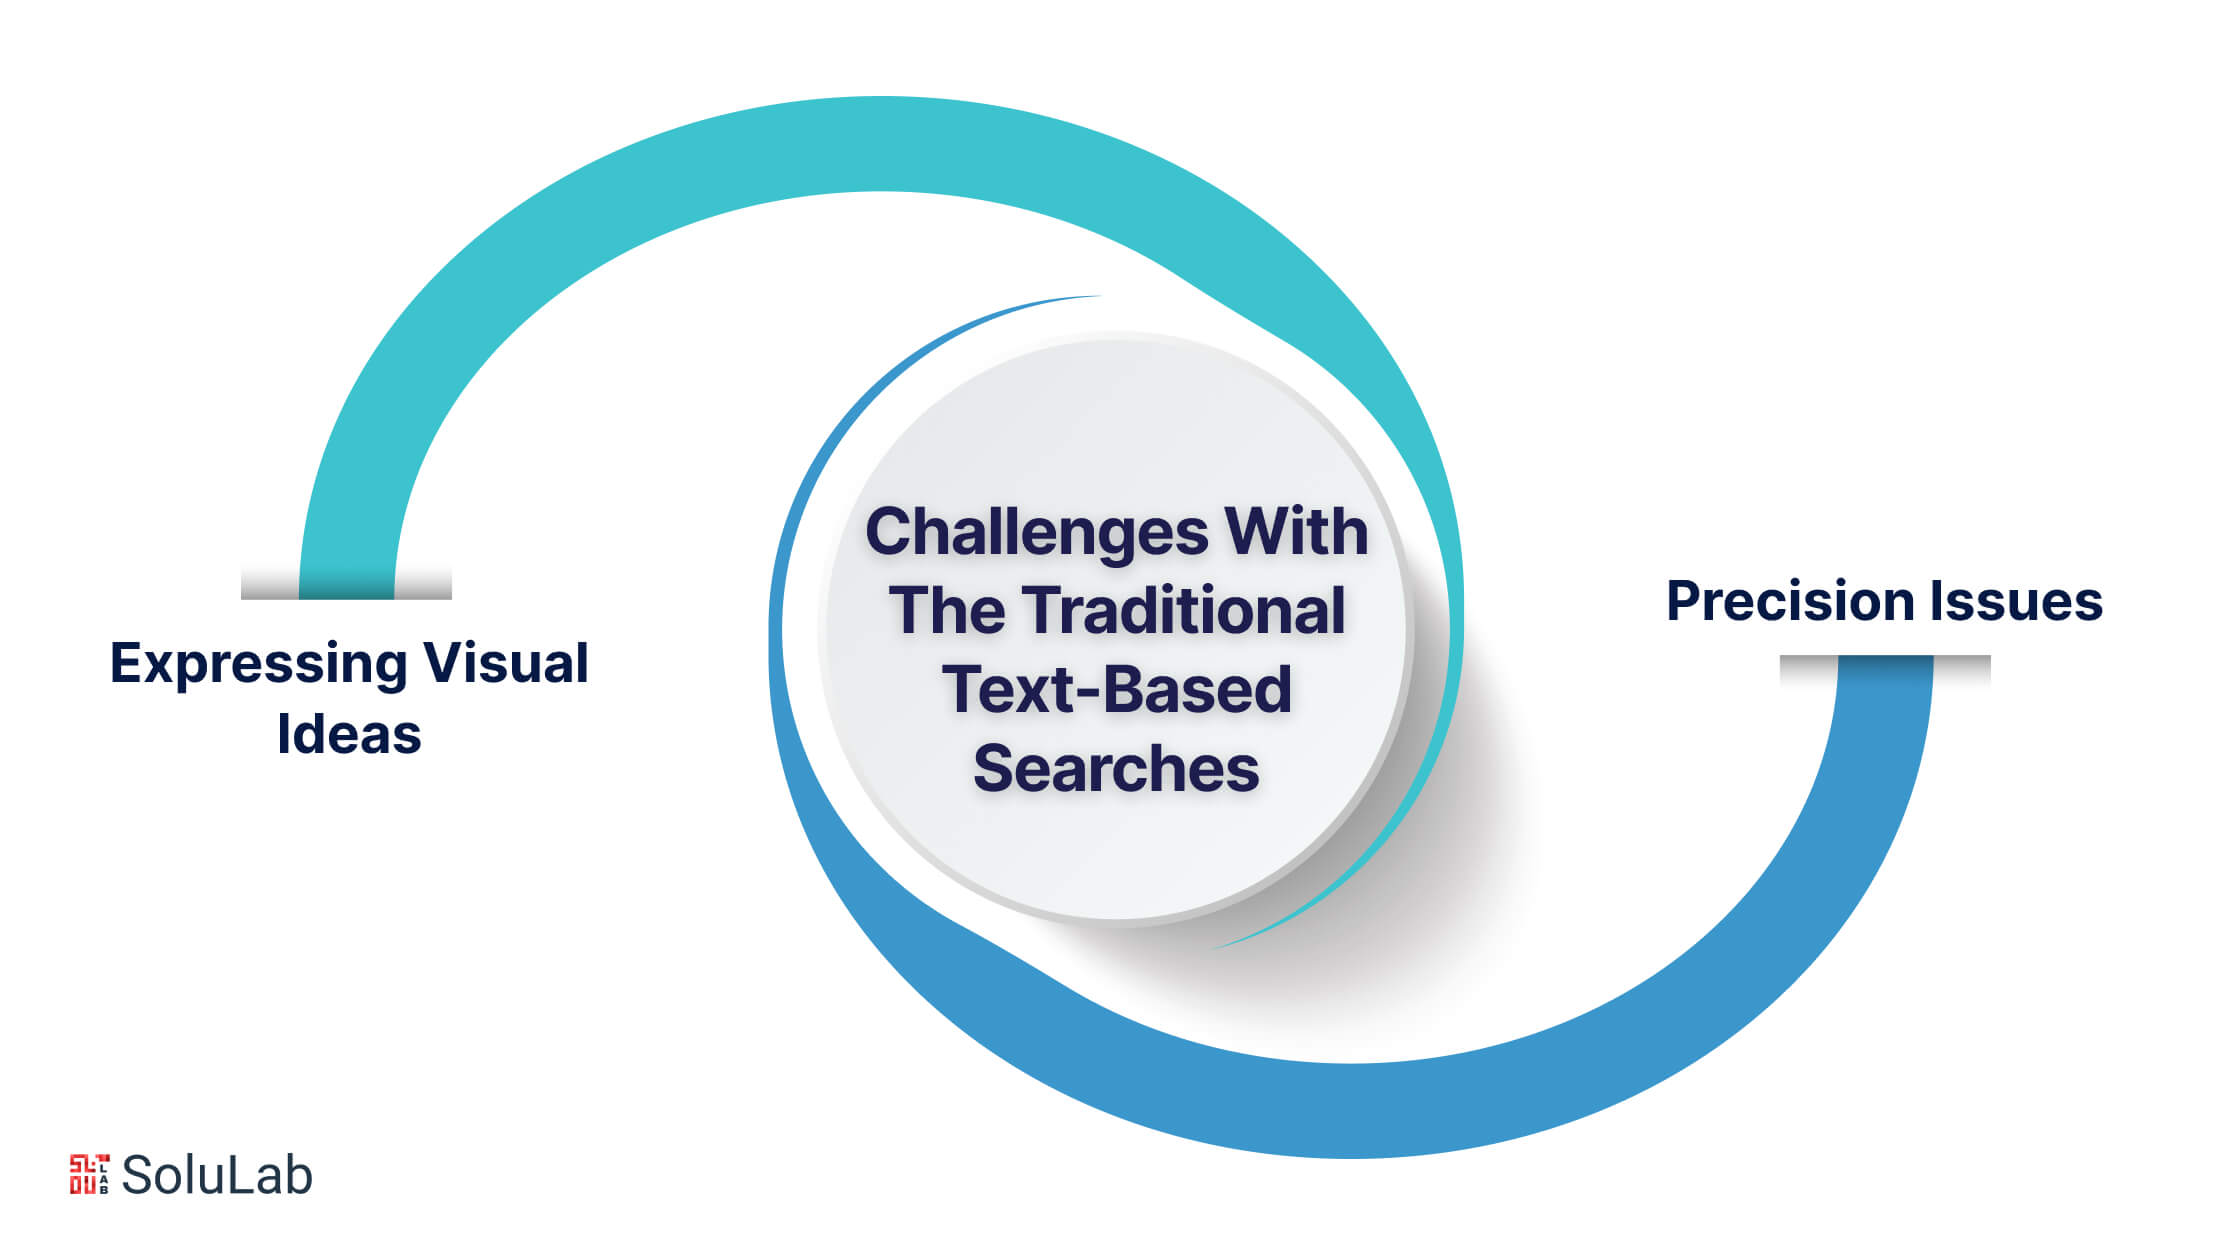 Challenges With The Traditional Text-Based Searches